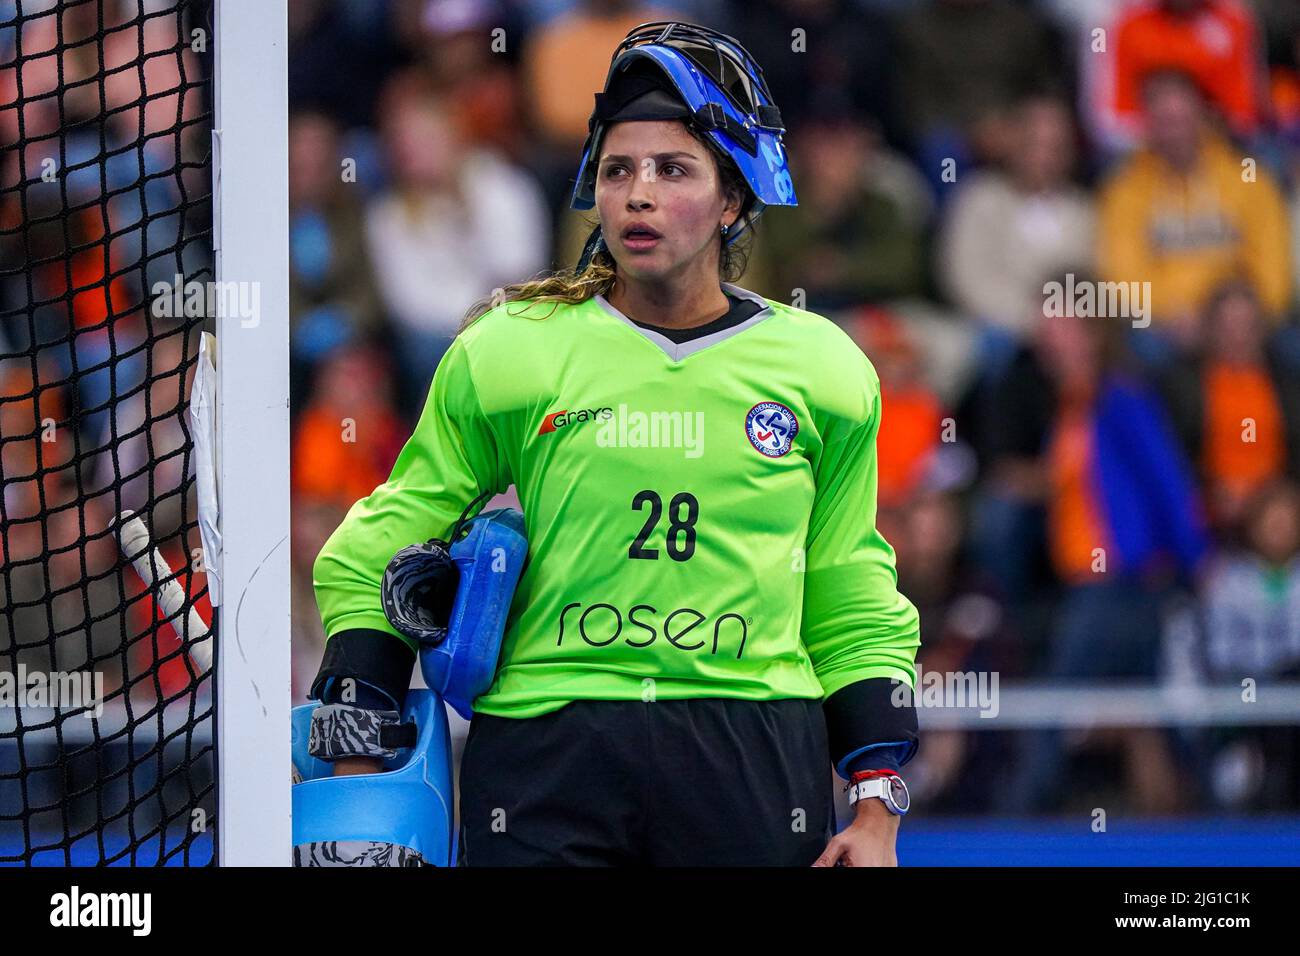 AMSTELVEEN, NETHERLANDS - JULY 6: Goalkeeper Natalia Salvador of Chile during the FIH Hockey Women's World Cup 2022 match between Netherlands and Chile at the Wagener Hockey Stadium on July 6, 2022 in Amstelveen, Netherlands (Photo by Jeroen Meuwsen/Orange Pictures) Stock Photo